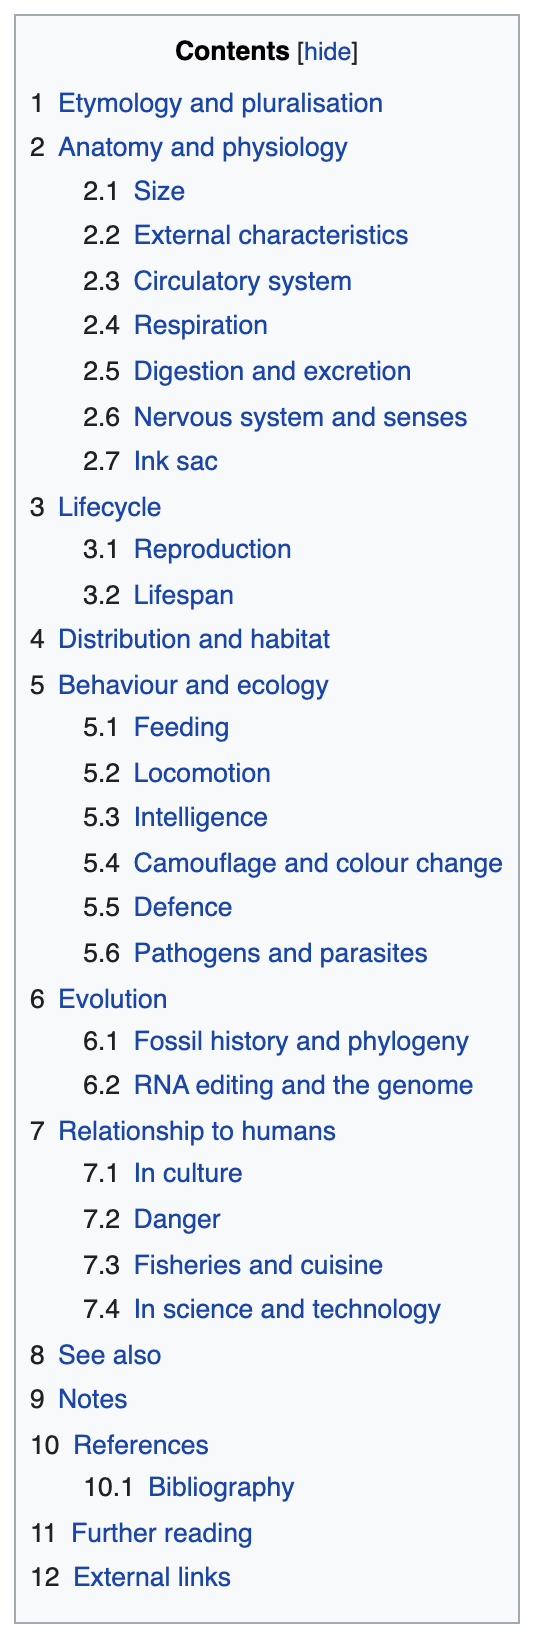 Table of Contents from the Octopus article on Wikipedia